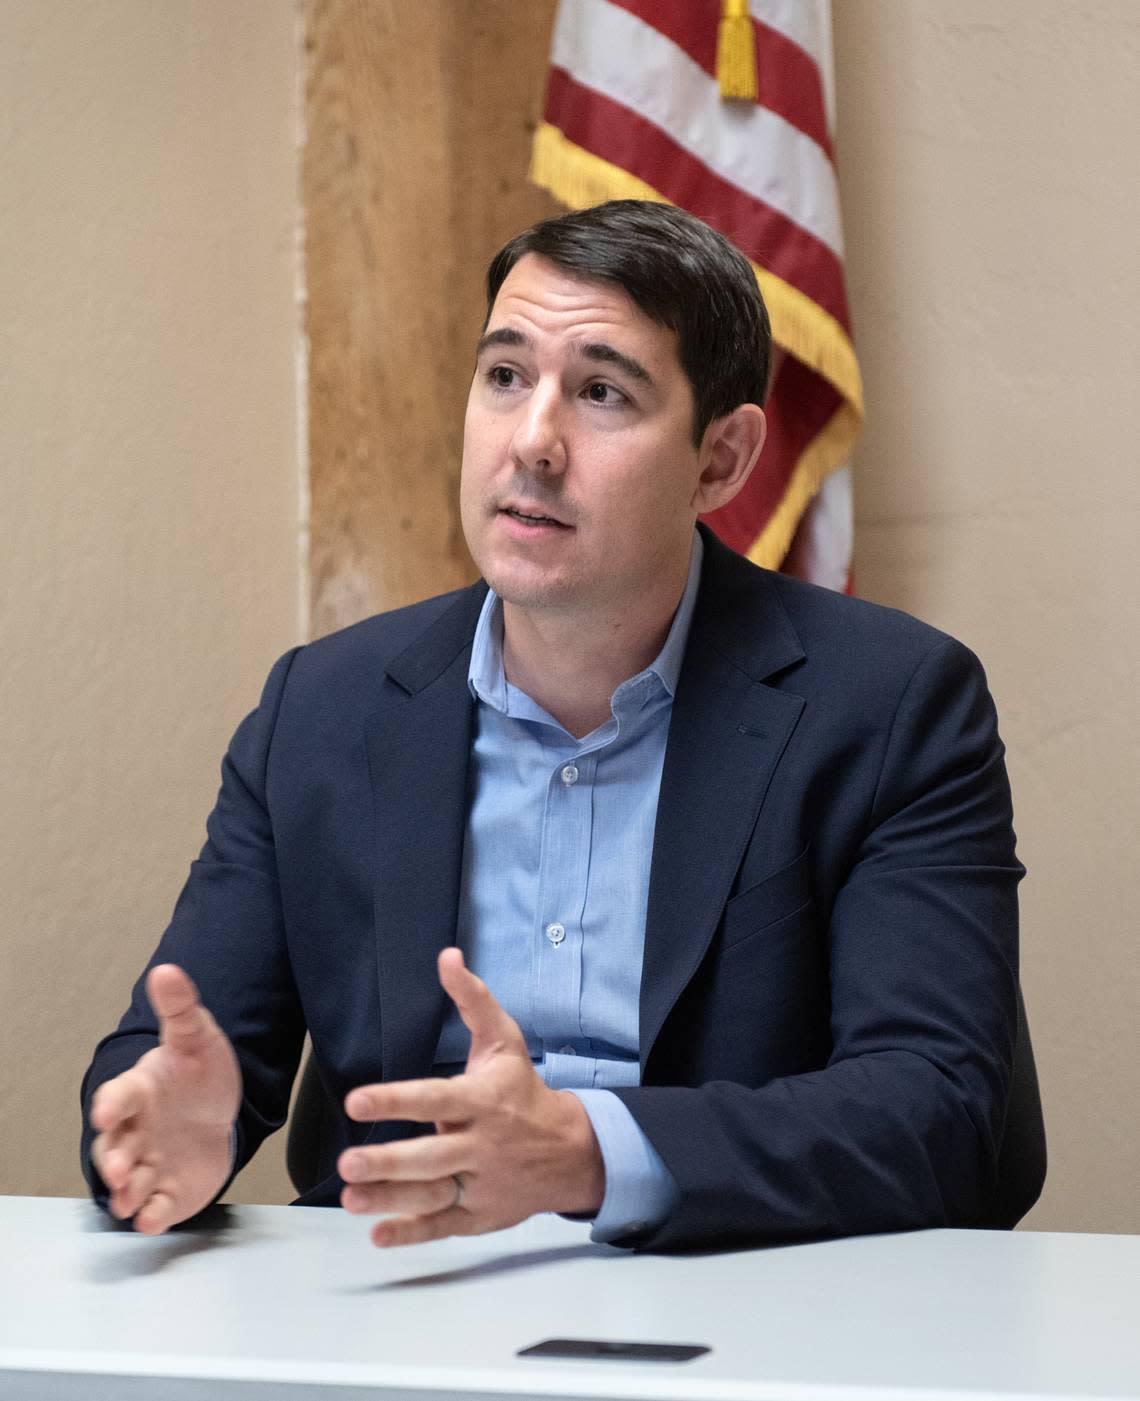 U.S. Congressional District 9 candidate Josh Harder answers a question from the moderator during a debate with challenger Tom Patti at the Stockton Record newspaper office in Stockton on Oct. 13, 2022. Andy Alfaro/aalfaro@modbee.com